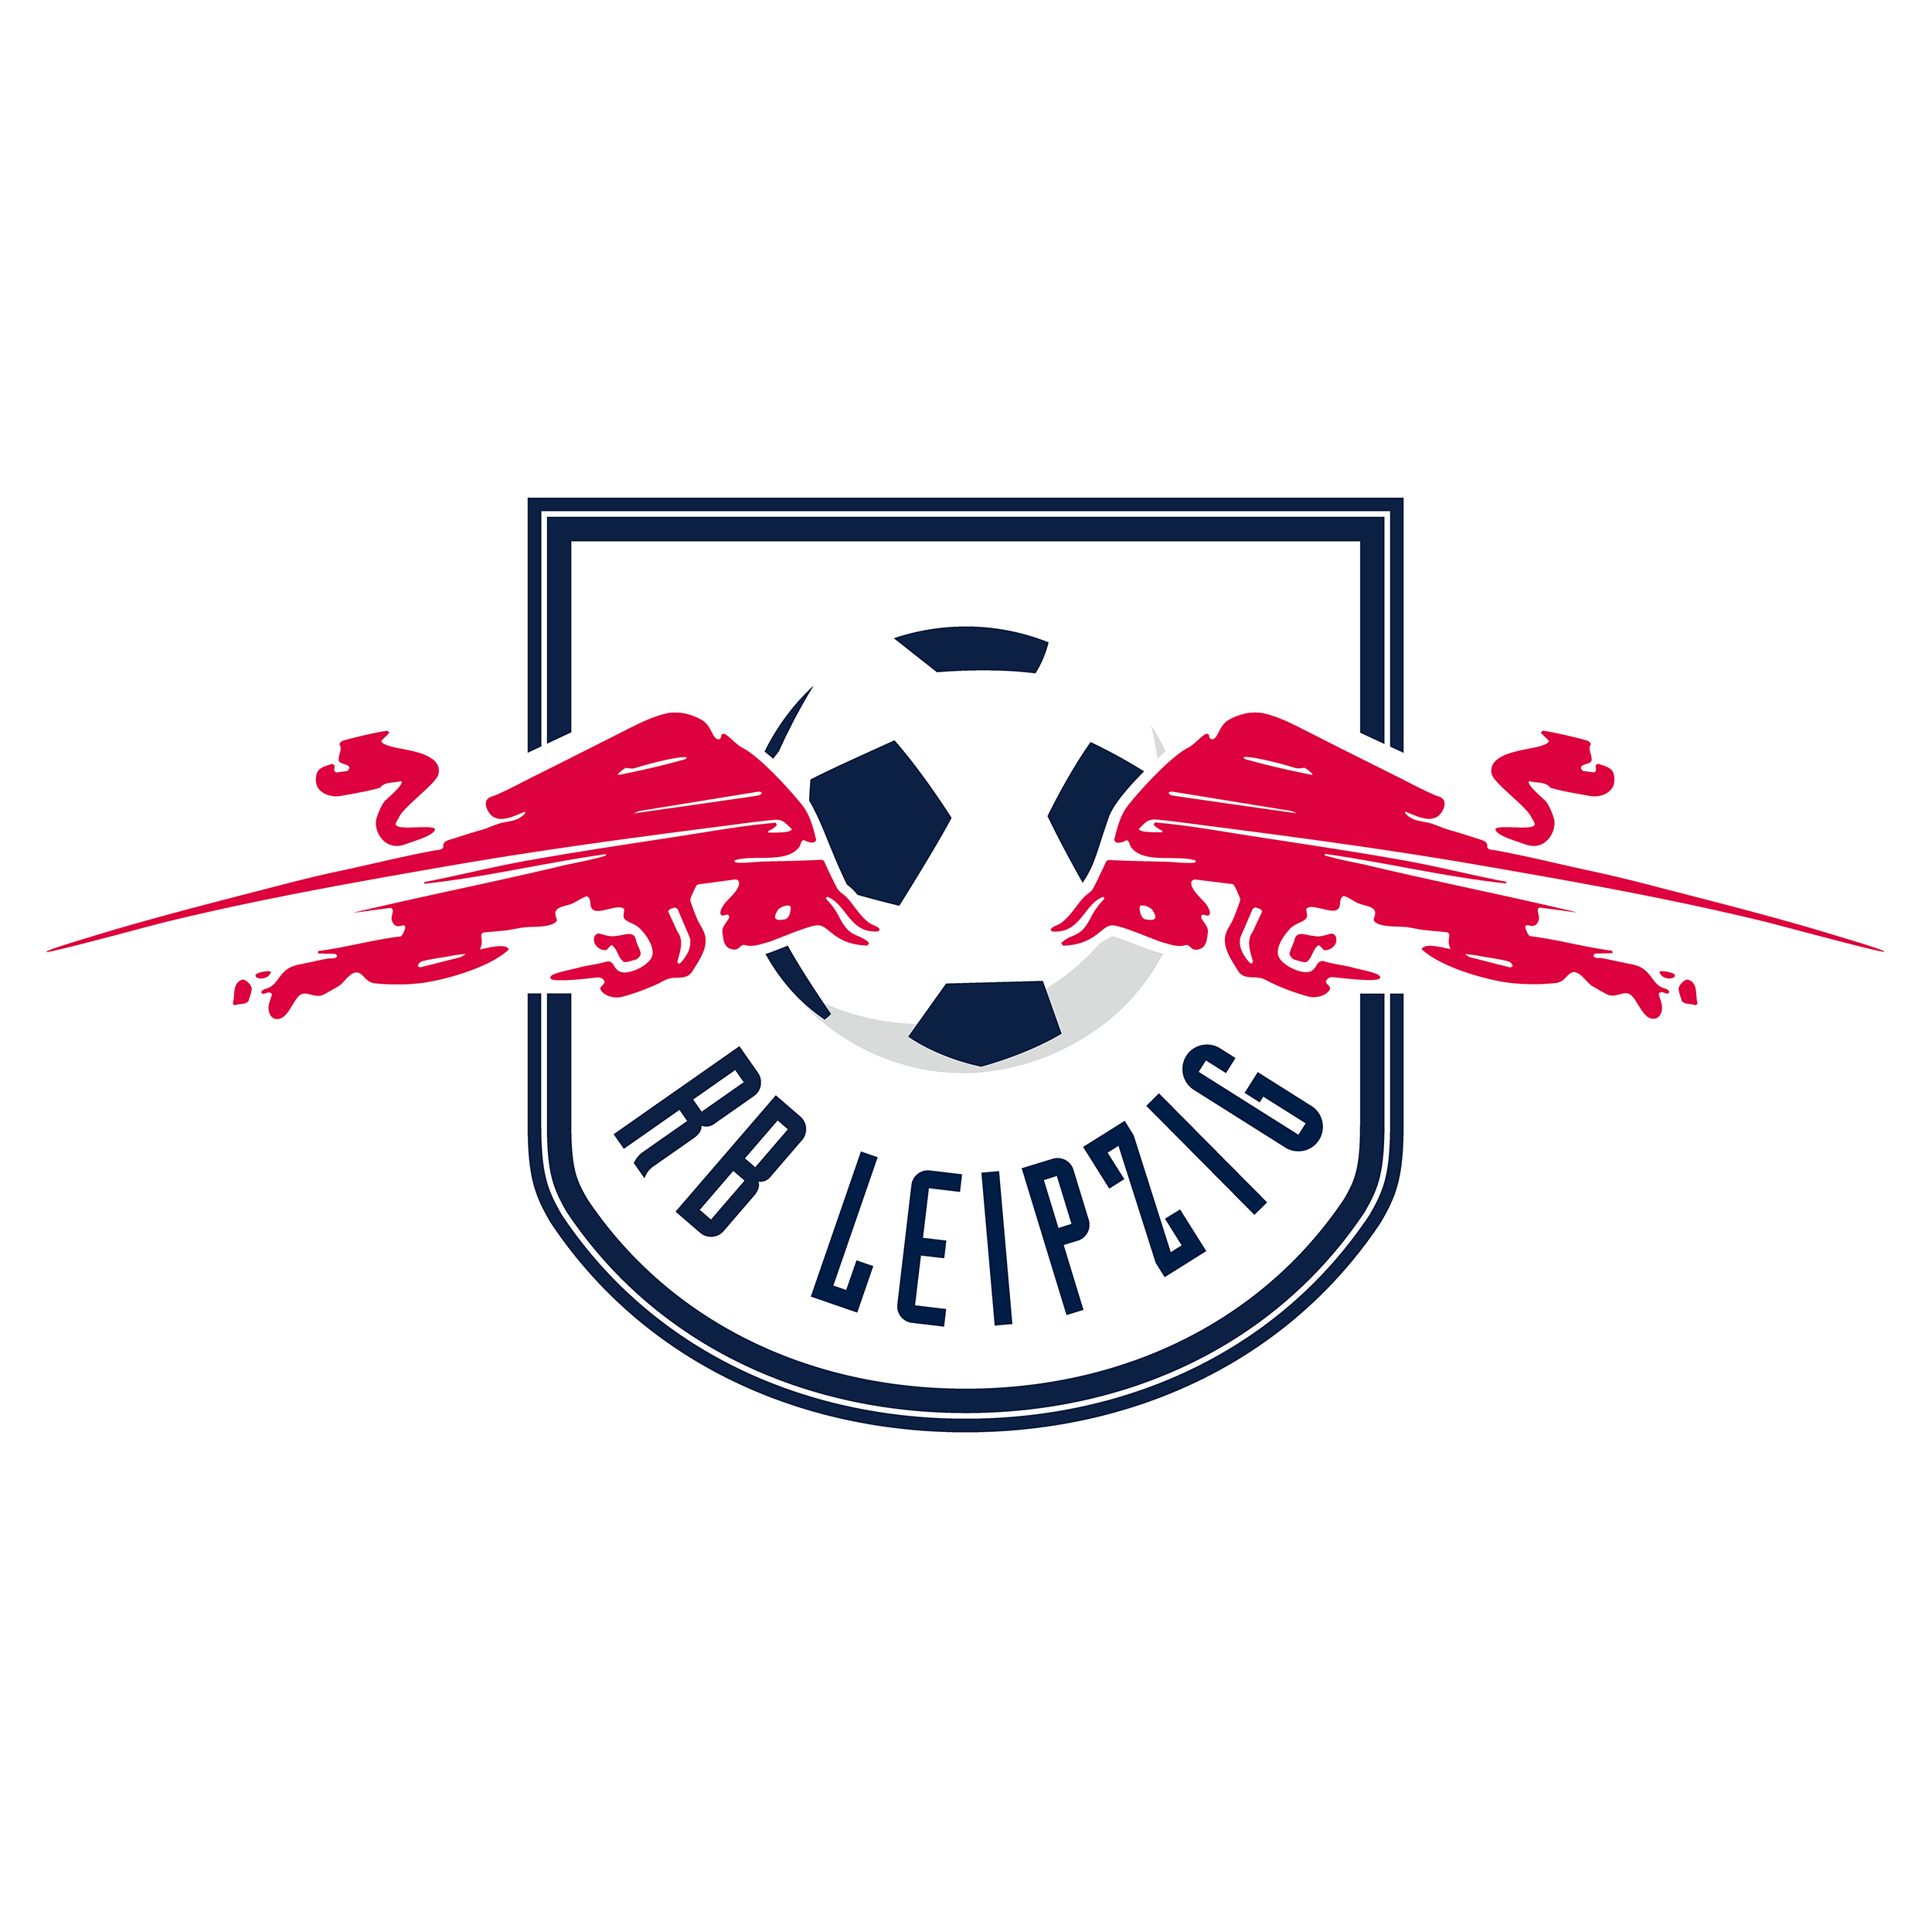 <strong>RB Leipzig</strong>